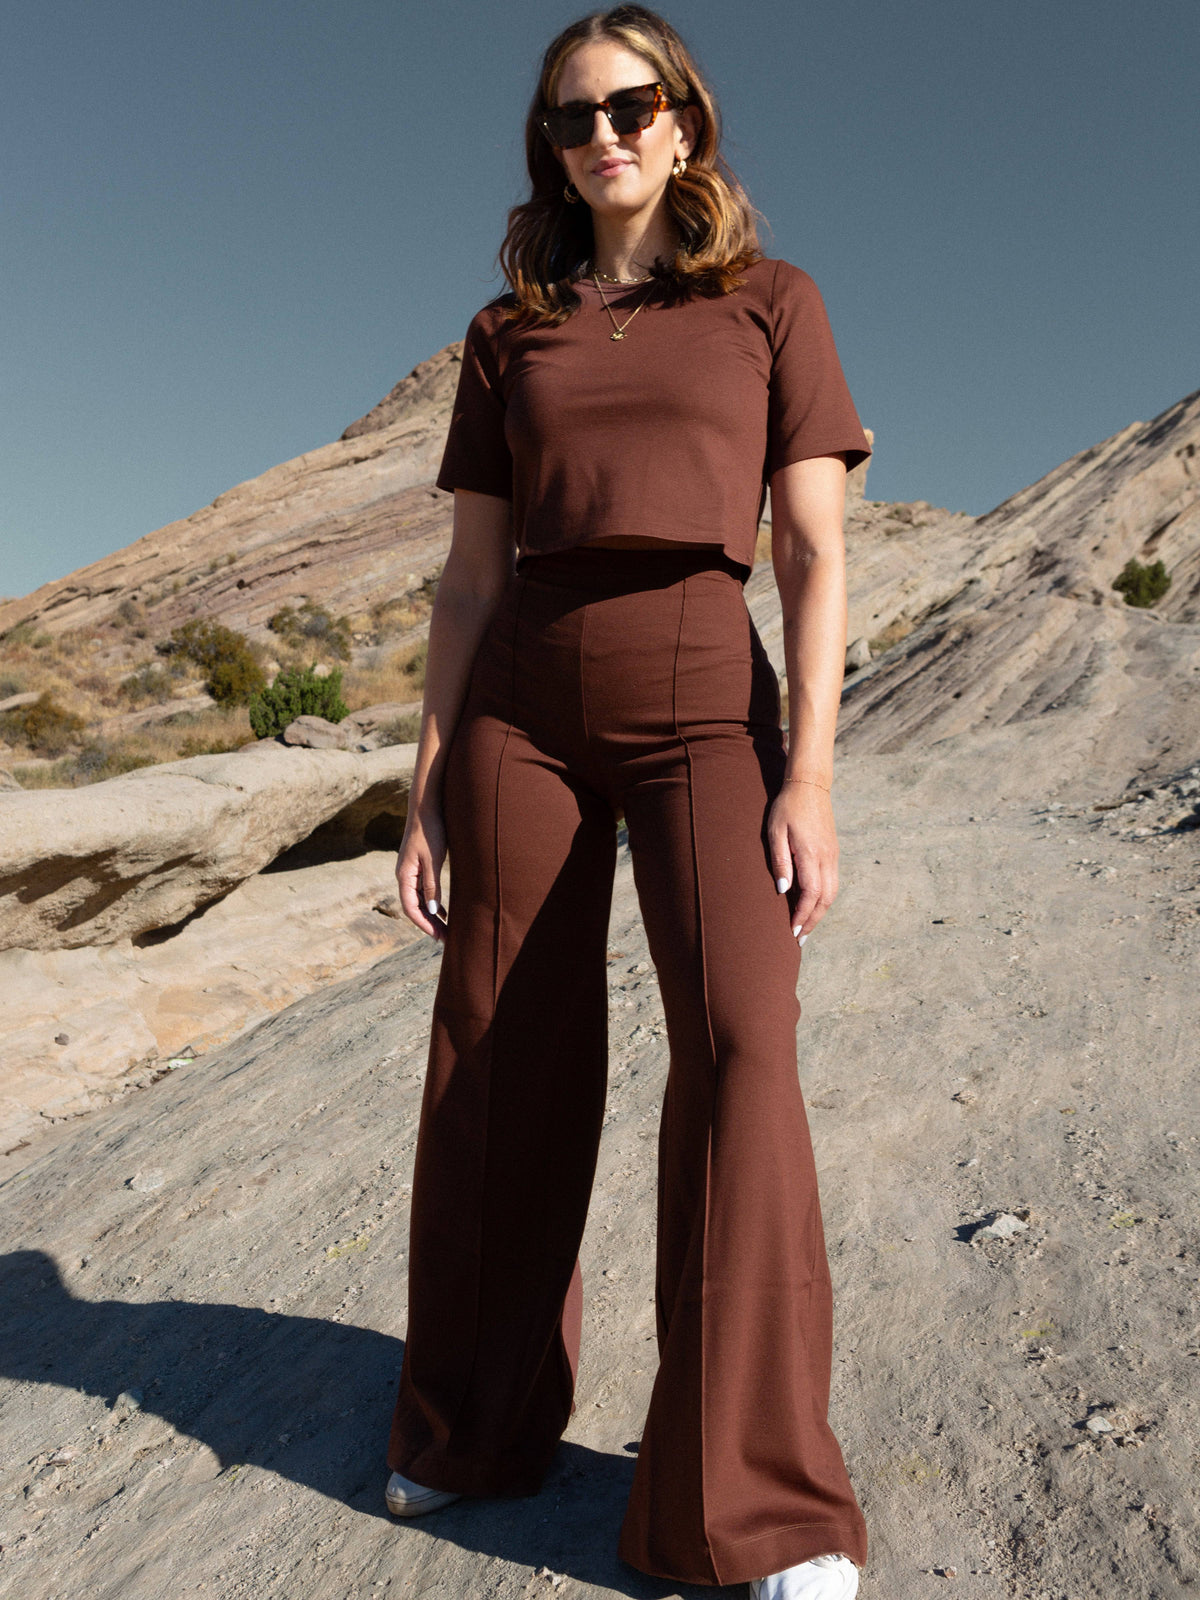 TENACITY : Wide leg pants with stud and eyelet decoration